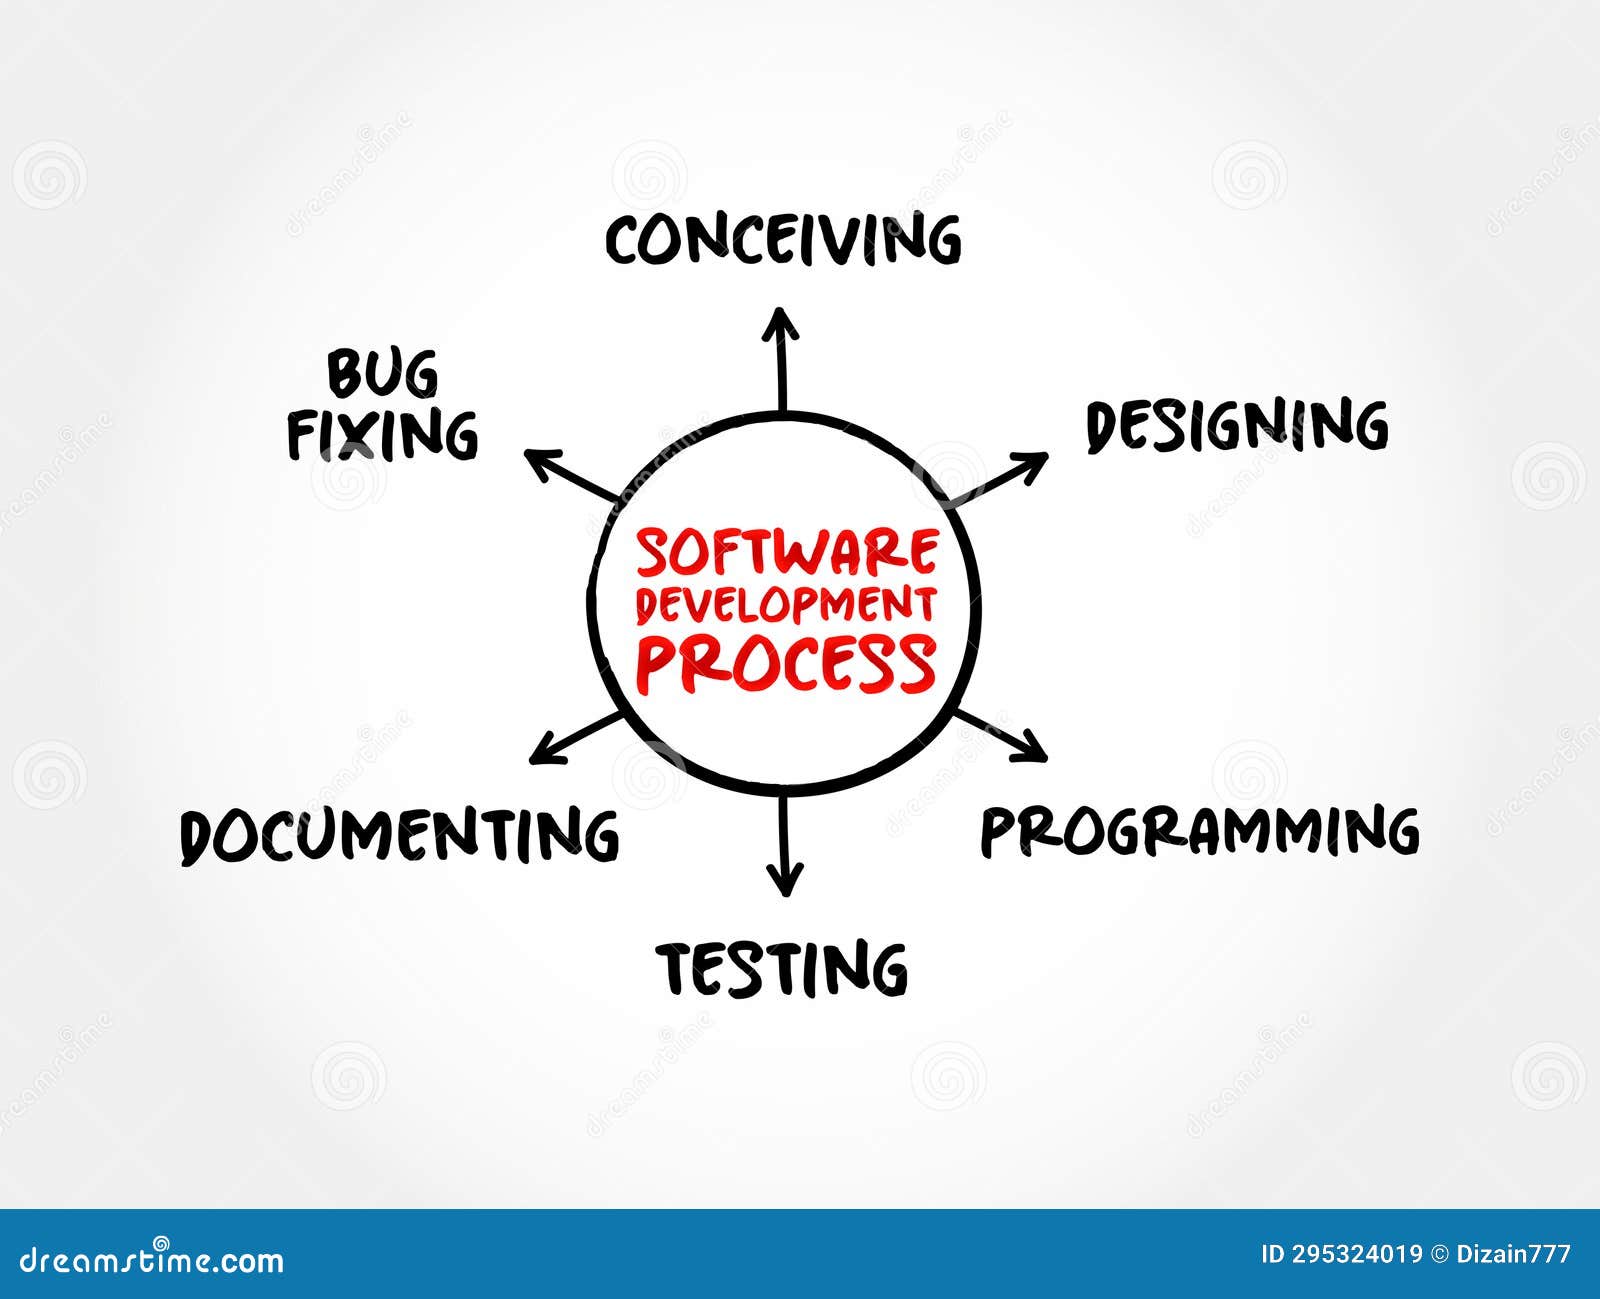 software development process cycle of conceiving, ing, programming, documenting, testing, and bug fixing , mind map